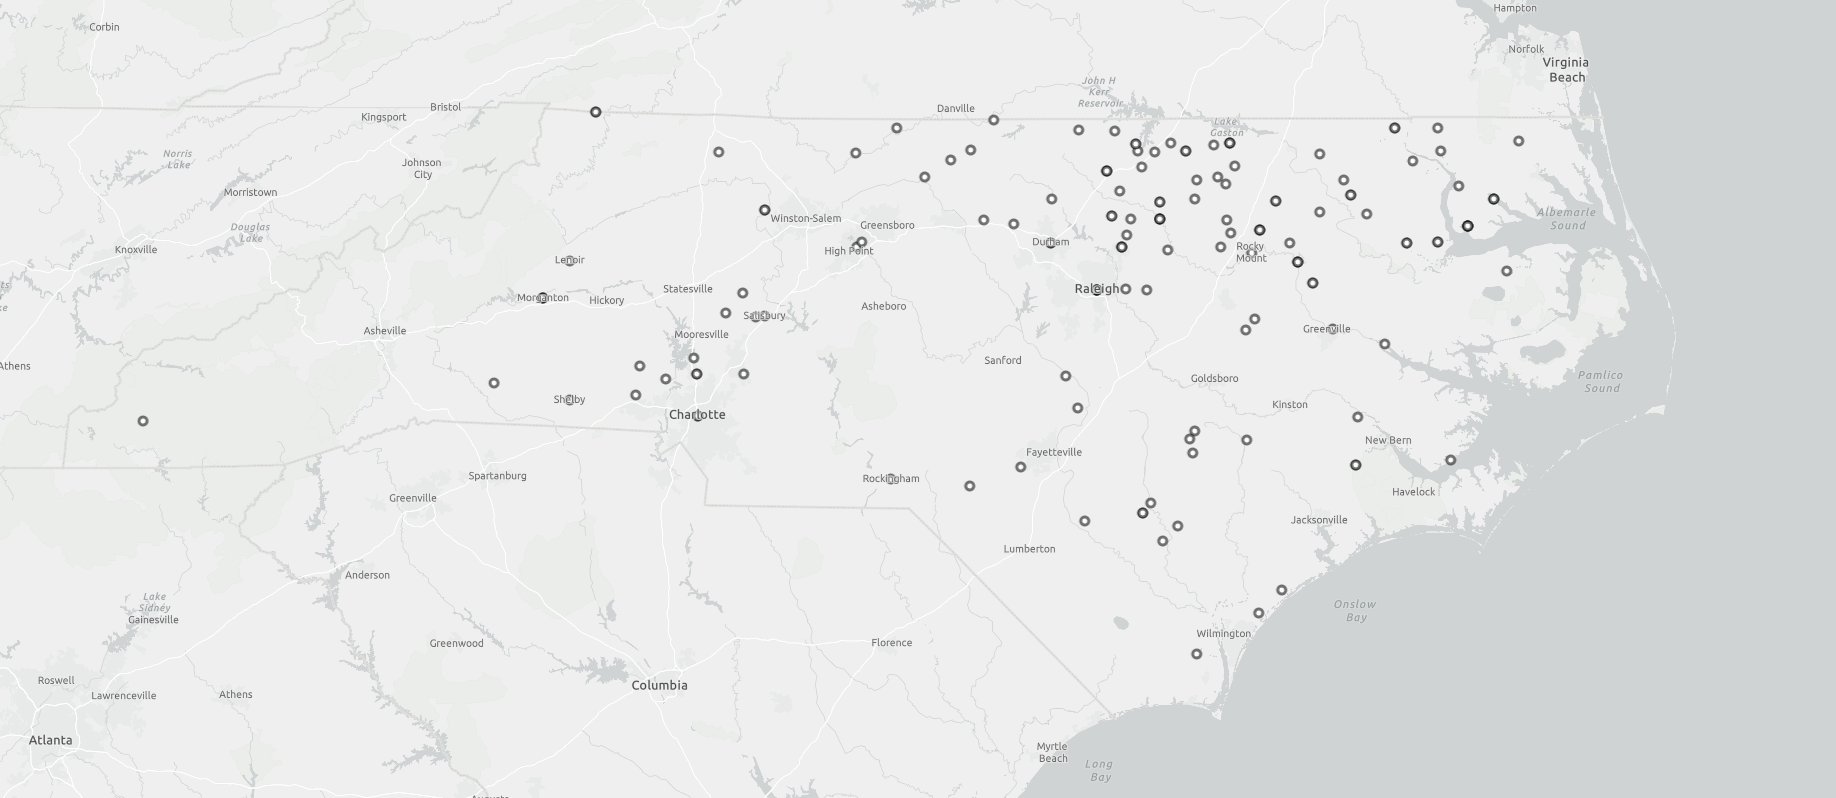 Map representing plantations in North Carolina that are included in the dataset for this project.